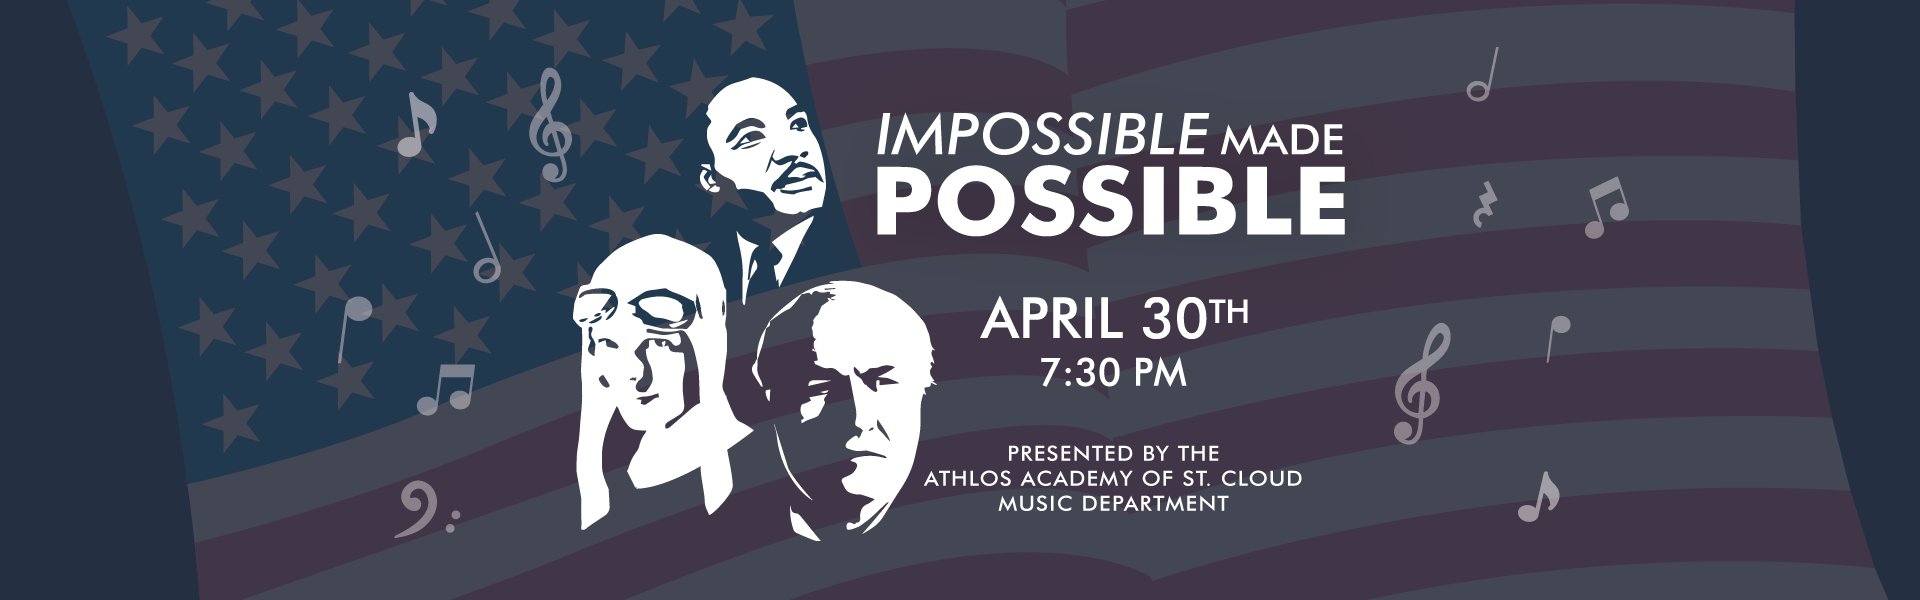 Musical: Impossible Made Possible